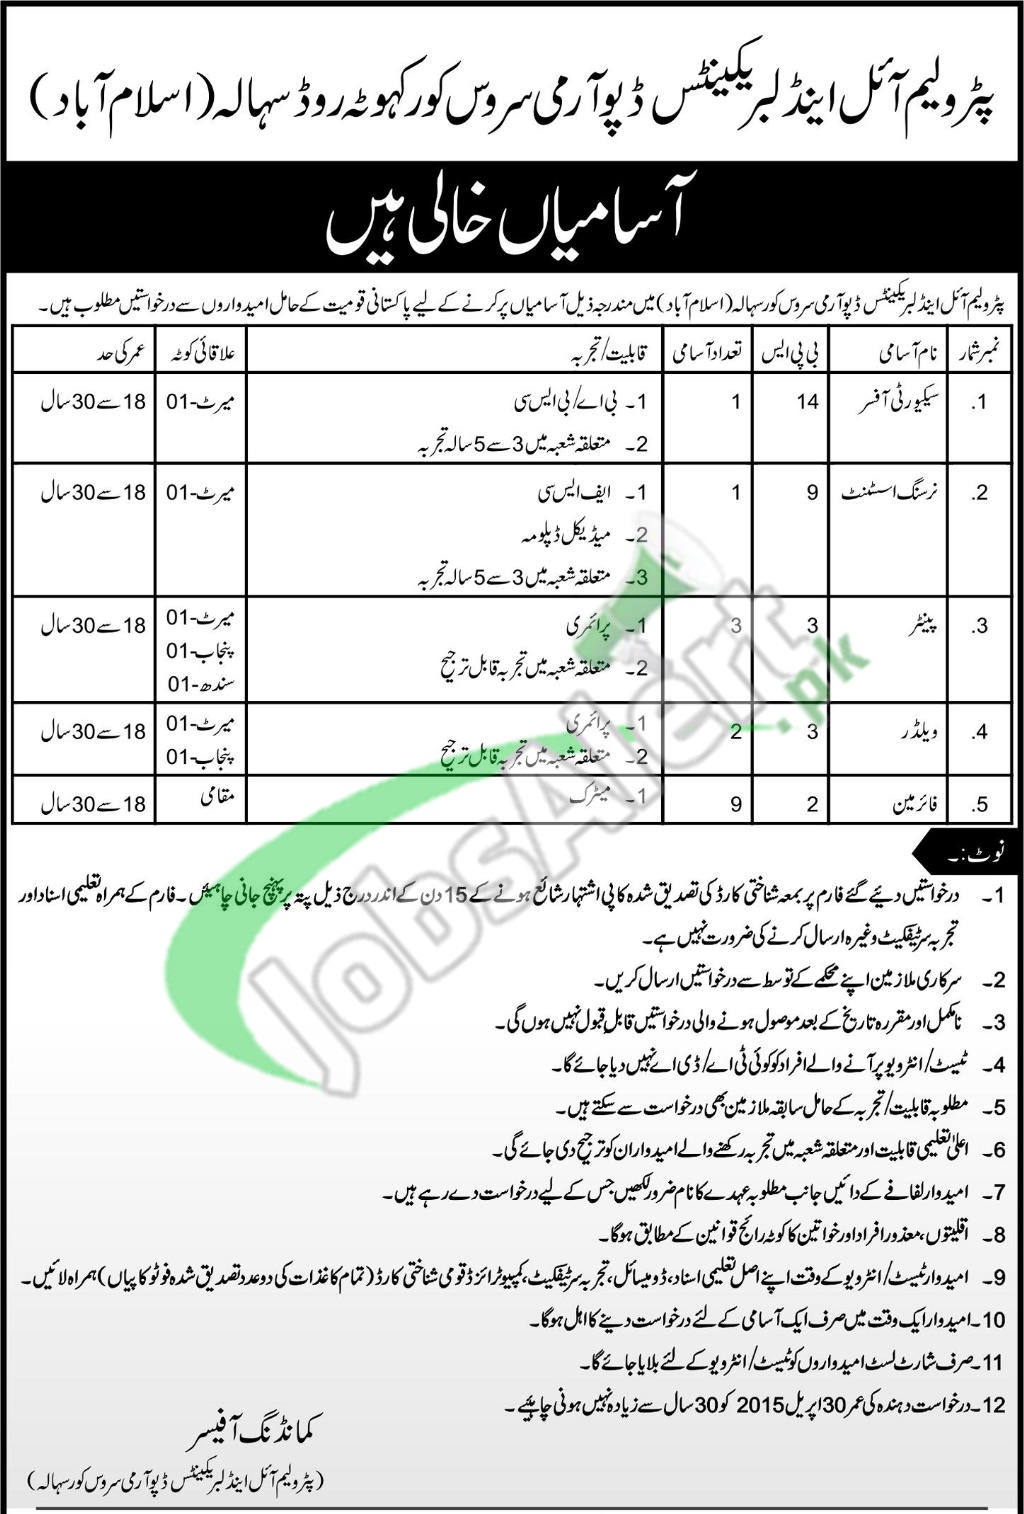 Petroleum Oil and Lubricants Depot Islamabad Jobs